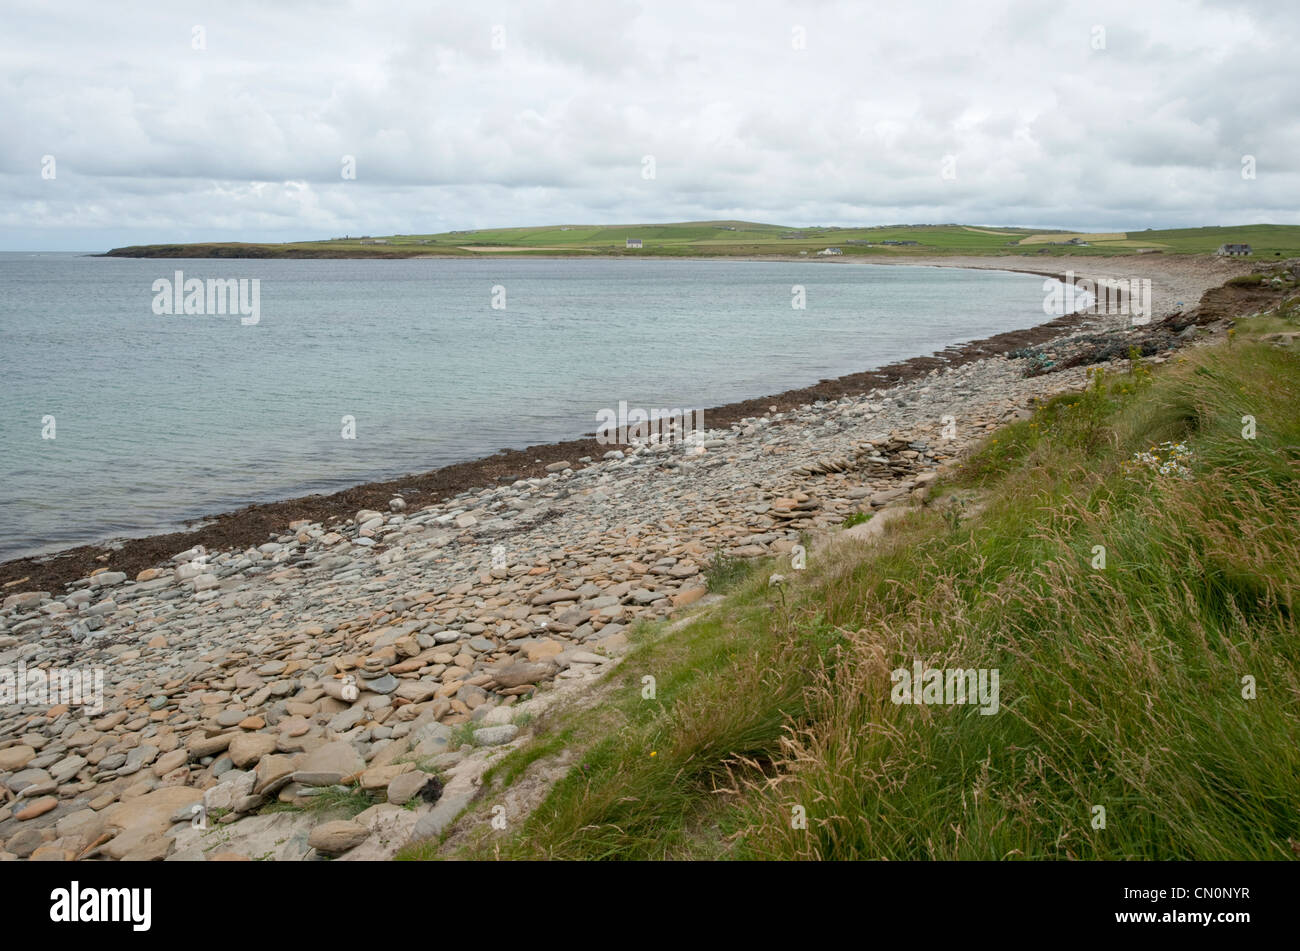 The Bay of Skaill at the neolithical stone settlement of Skara Brae on the Orkney Islands, Scotland Stock Photo